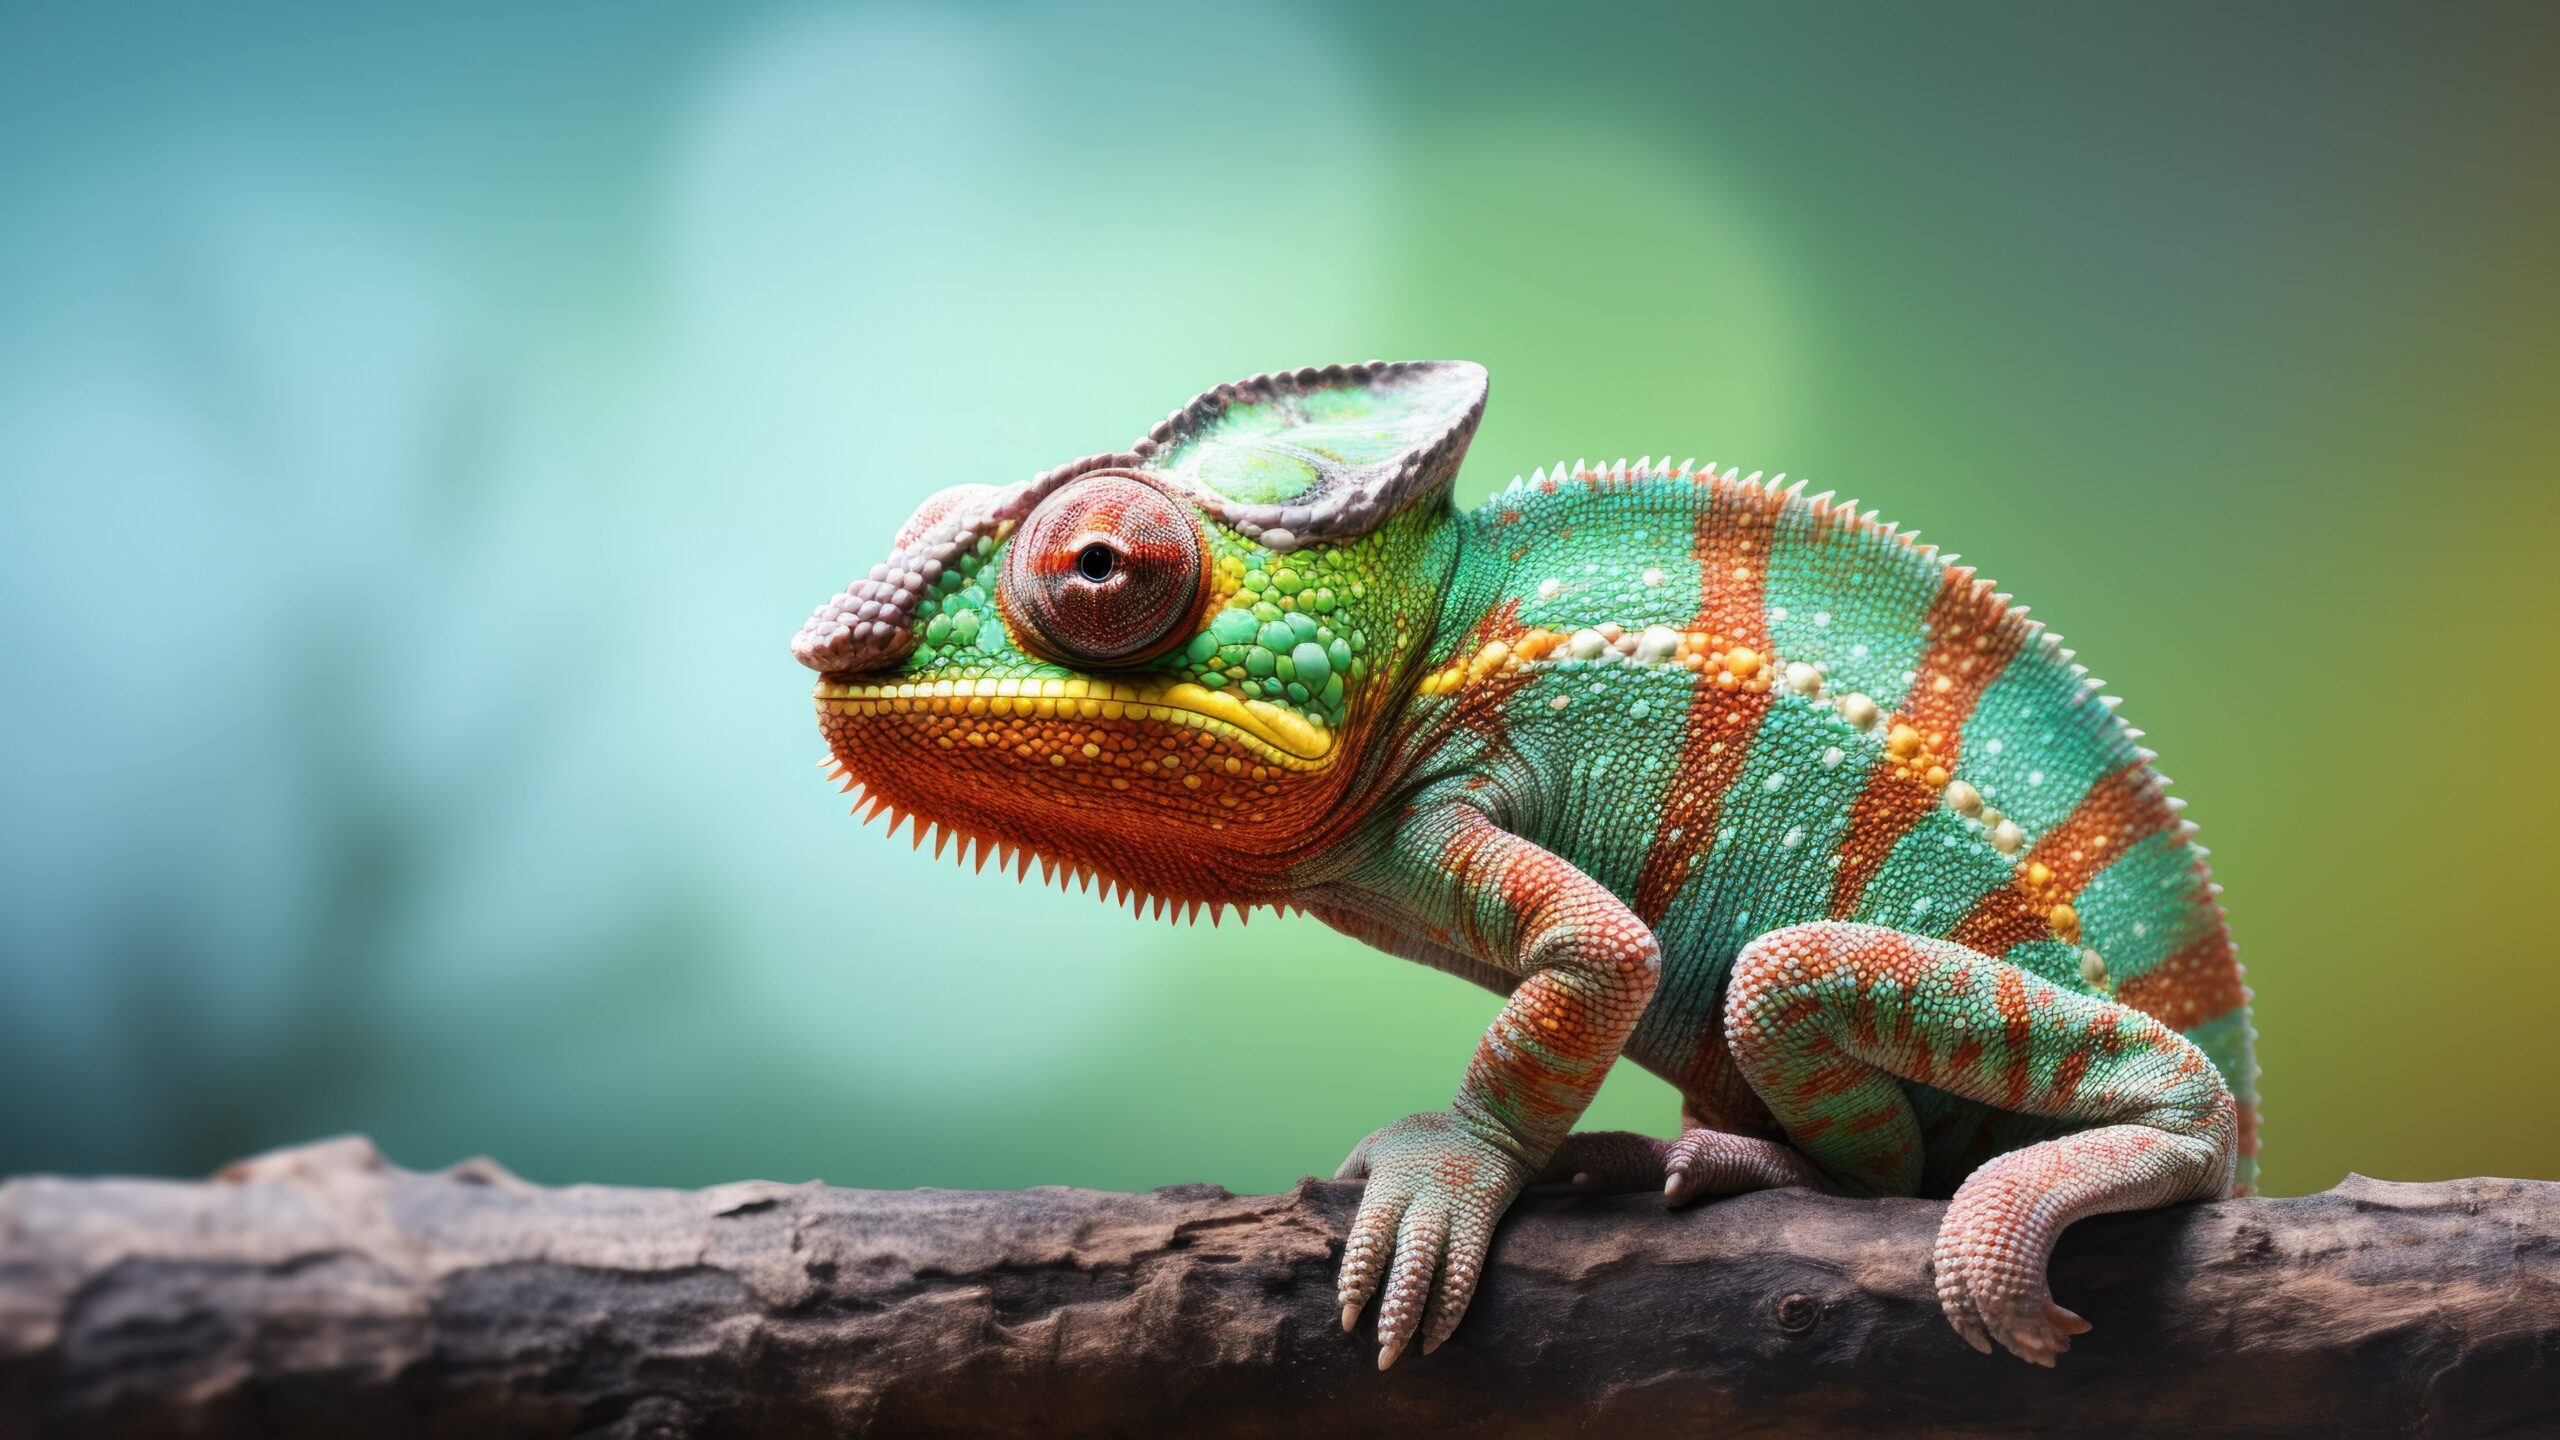 We explore the top 10 most interesting lizard facts, shedding light on their unique characteristics and crucial role in the ecosystem.